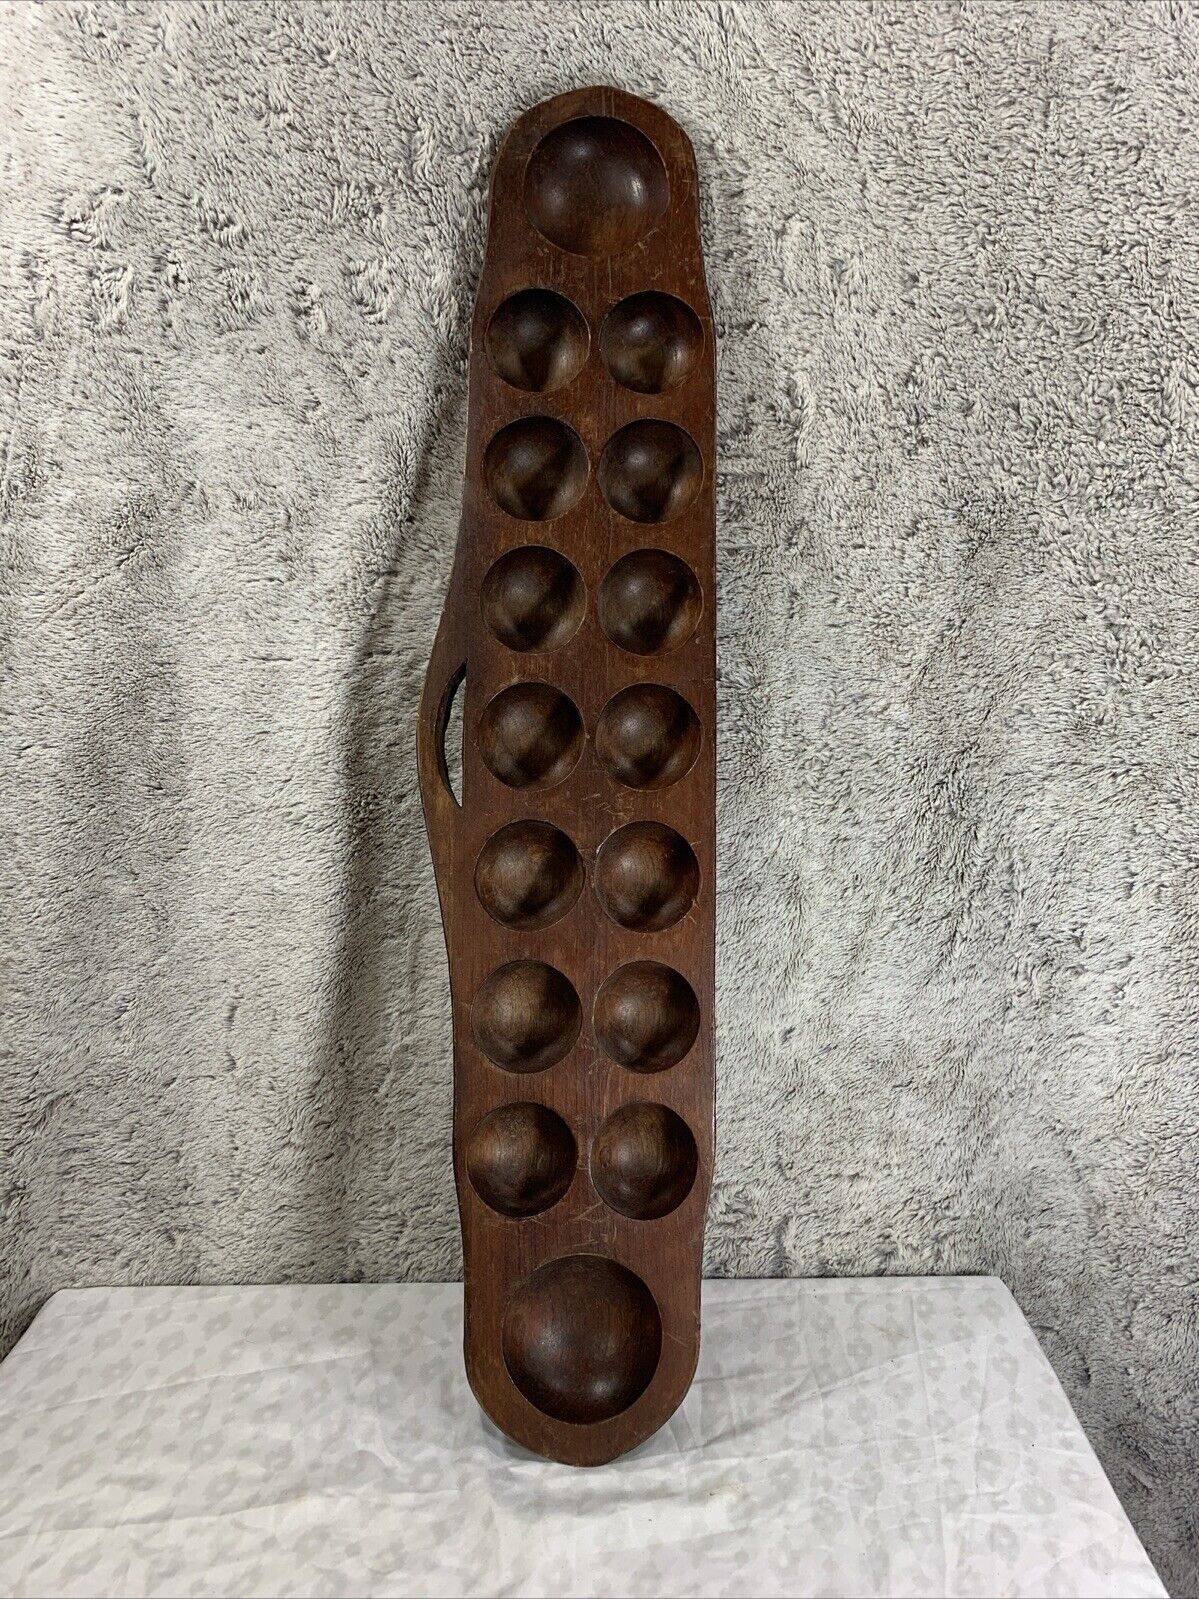 VTG African Mancala Game Board Wooden w/handle Hand Carved Beautiful Rustic